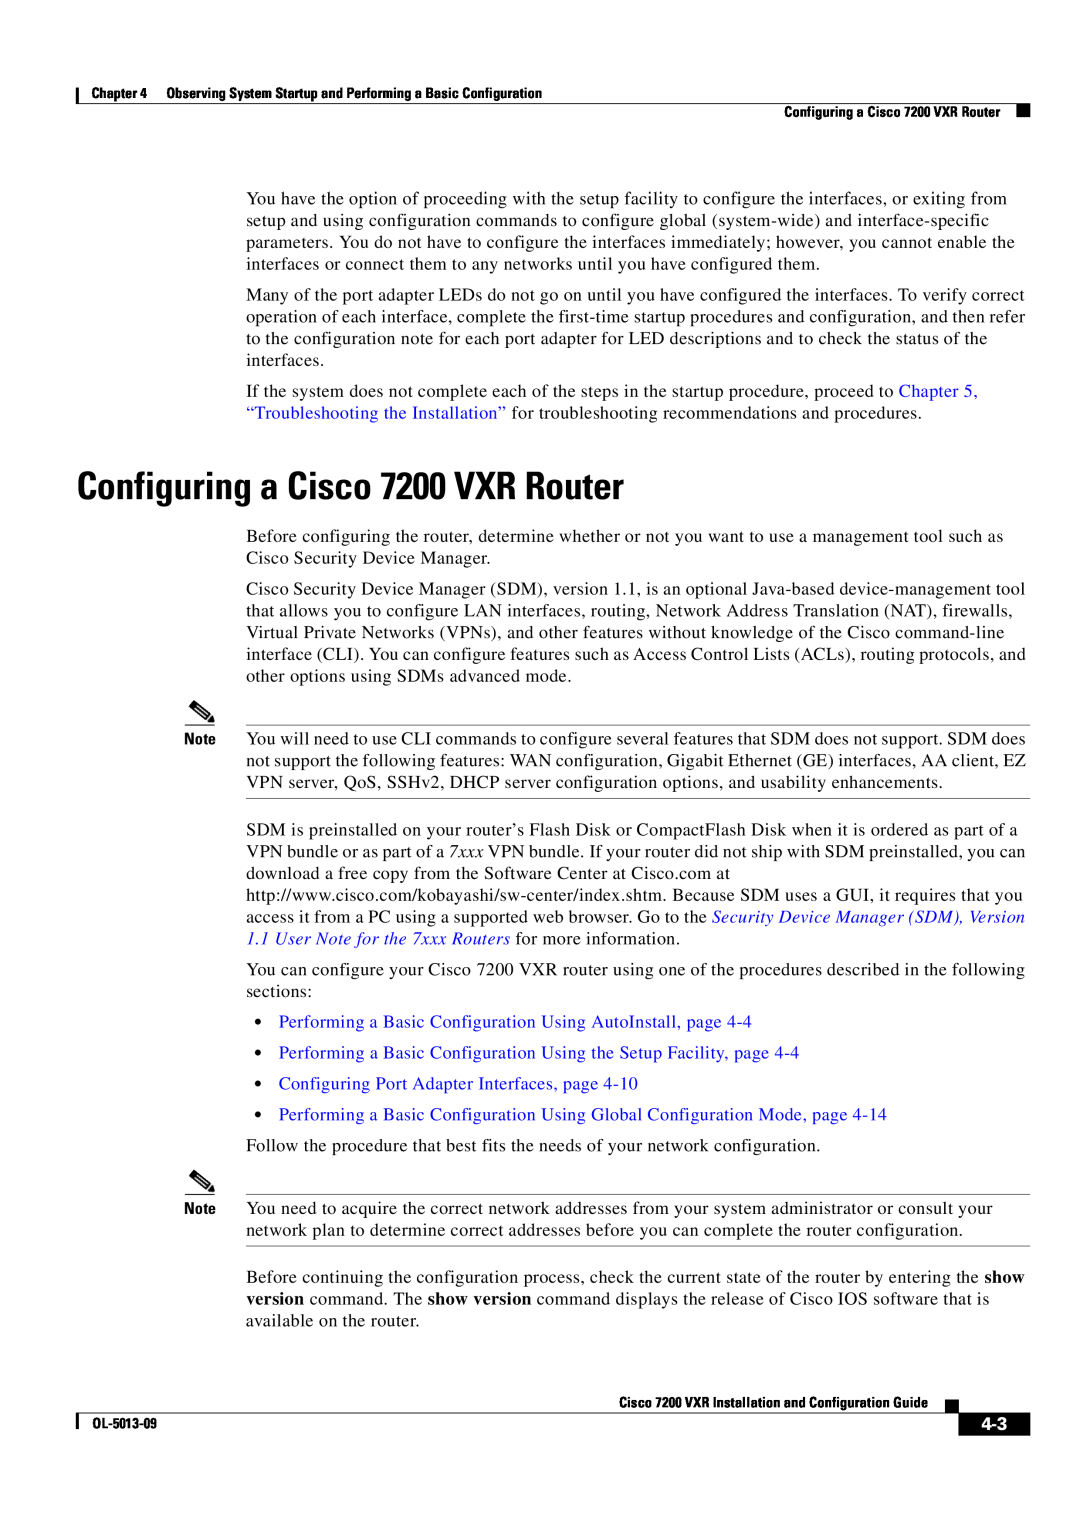 Cisco Systems manual Configuring a Cisco 7200 VXR Router, Performing a Basic Configuration Using AutoInstall, page 